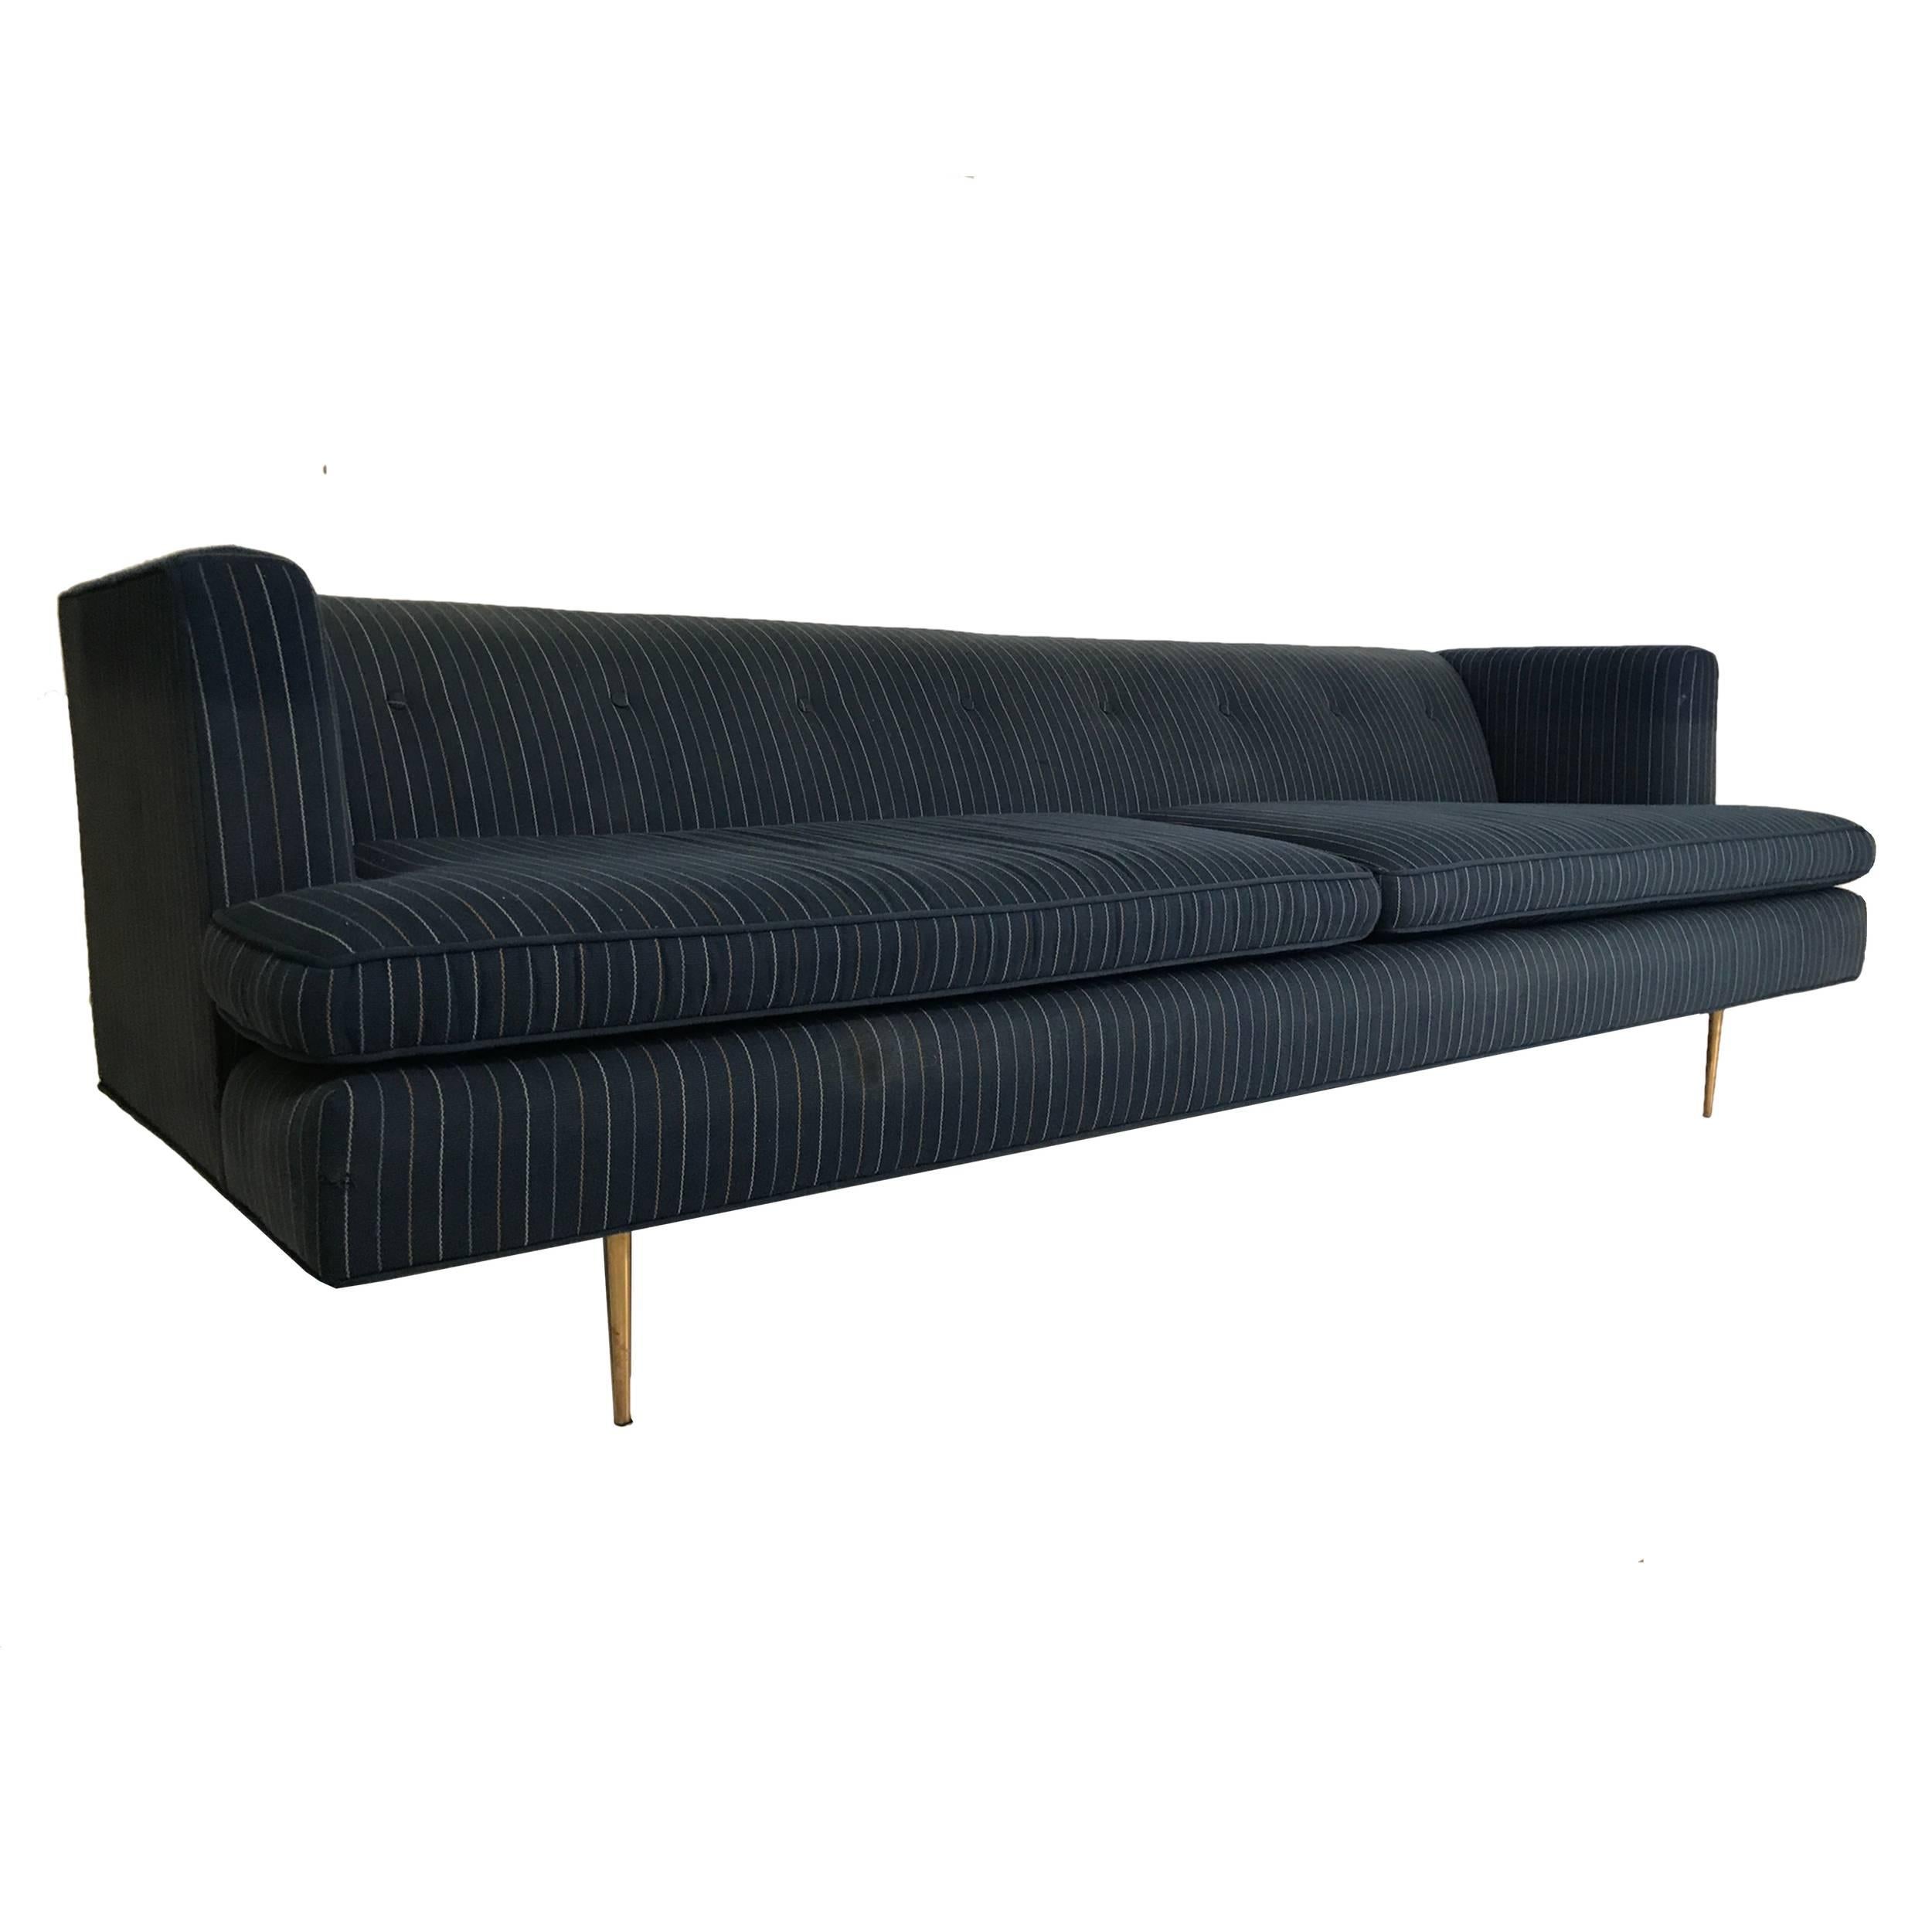 MN Originals custom 1950s sofa's are based on Edward Wormley's designs. Great original gondola or shelter style sofa with original upholstery and brass legs. Upholstery is not great and should be re-done.
